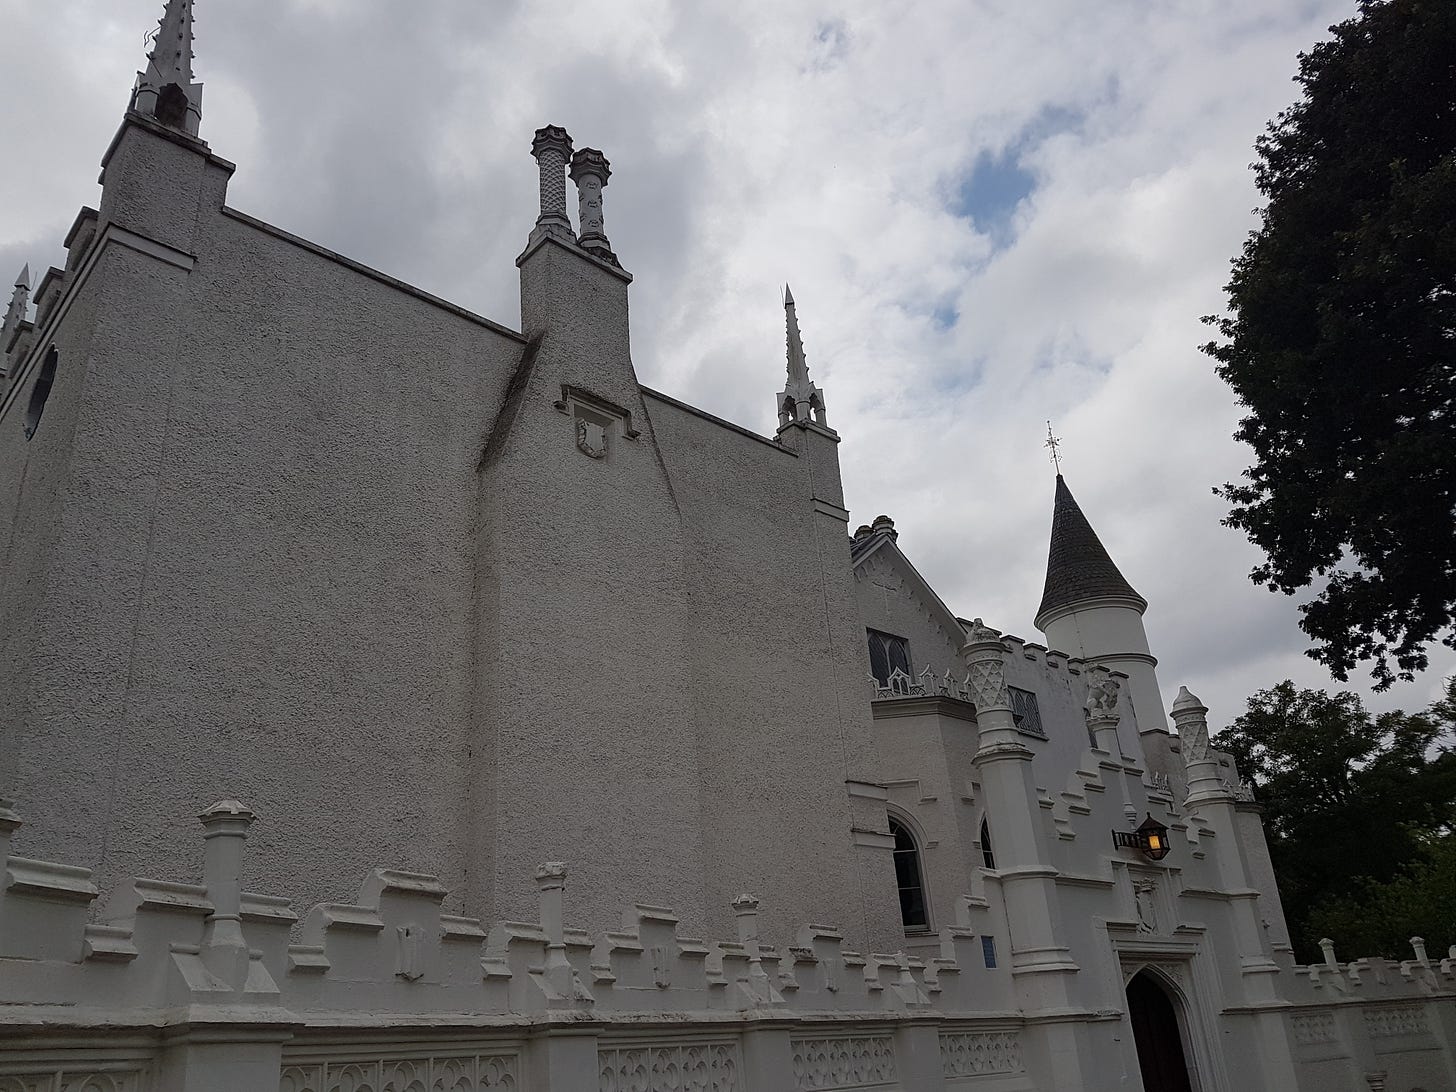 A photo I took of Strawberry Hill upon visiting it in 2021